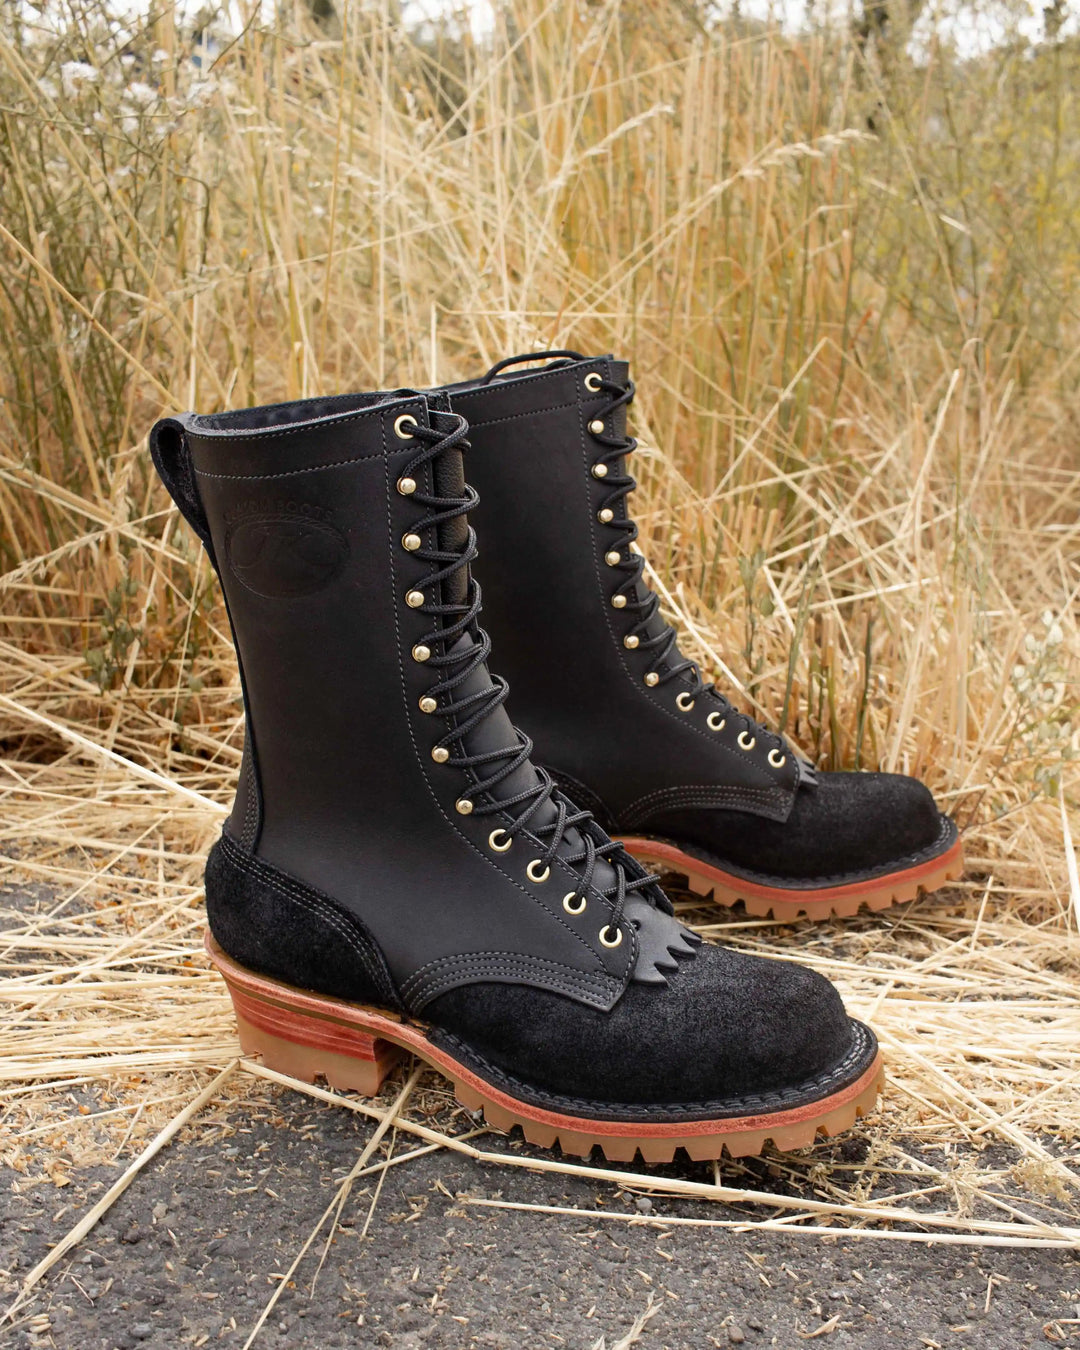 the superduty honey work boot from jk boots in black 06